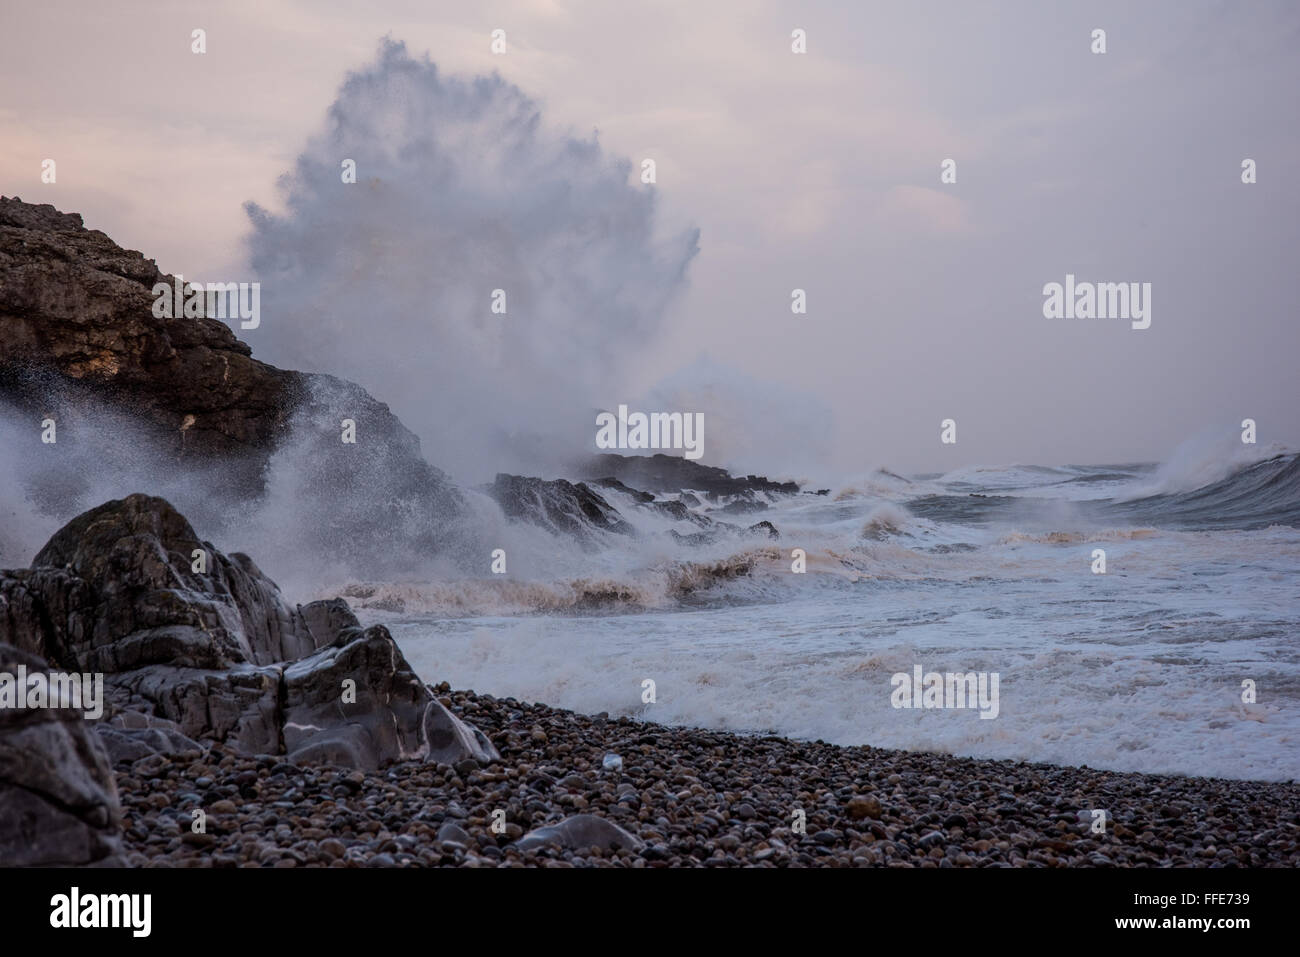 Winter storm Imogen generates rough seas and exploding waves on the rocks of Mumbles Head, South Wales, UK. Stock Photo